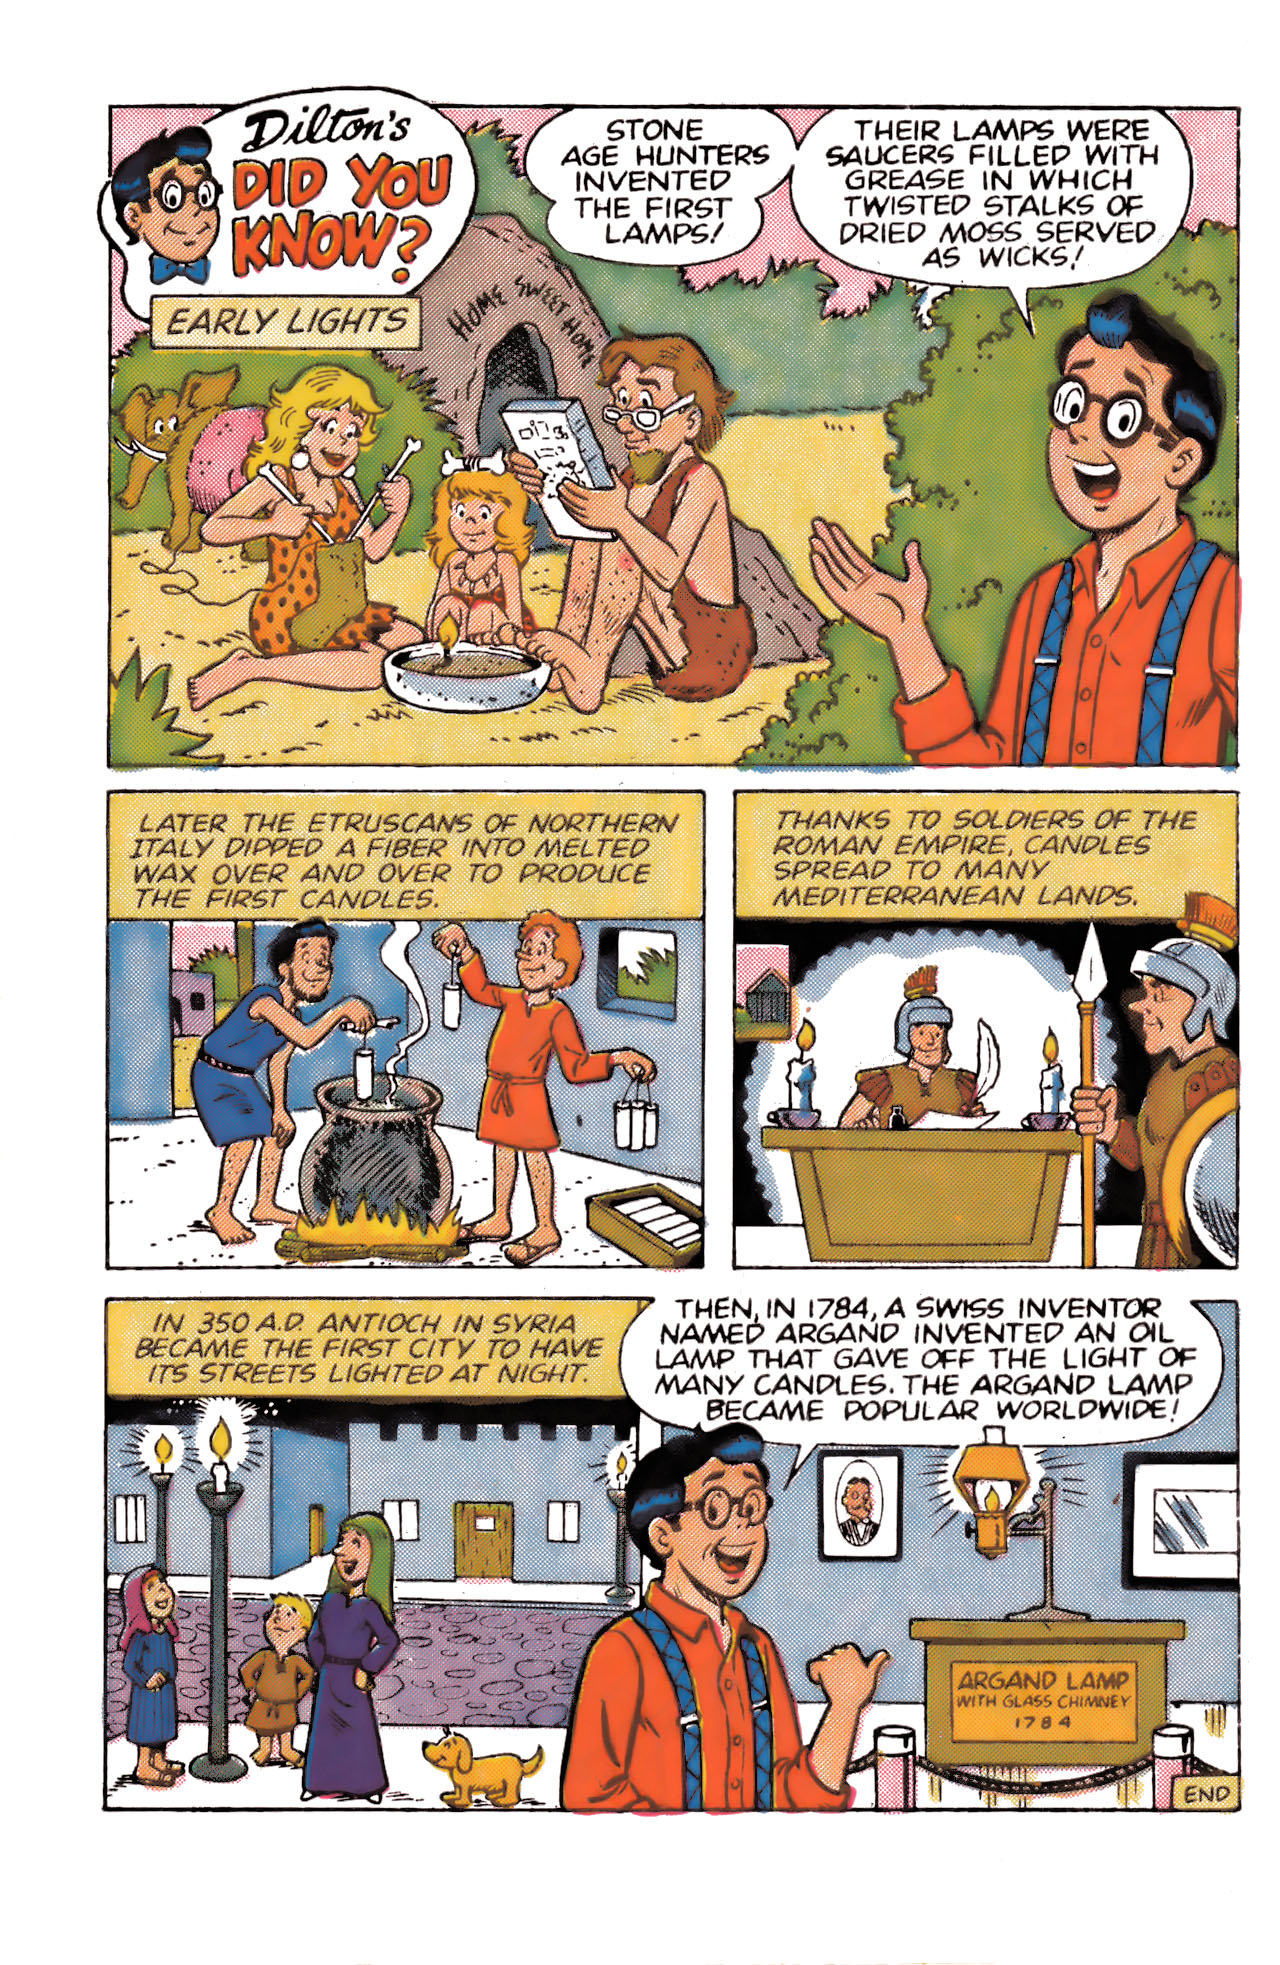 Read online Dilton's Strange Science comic -  Issue #1 - 32